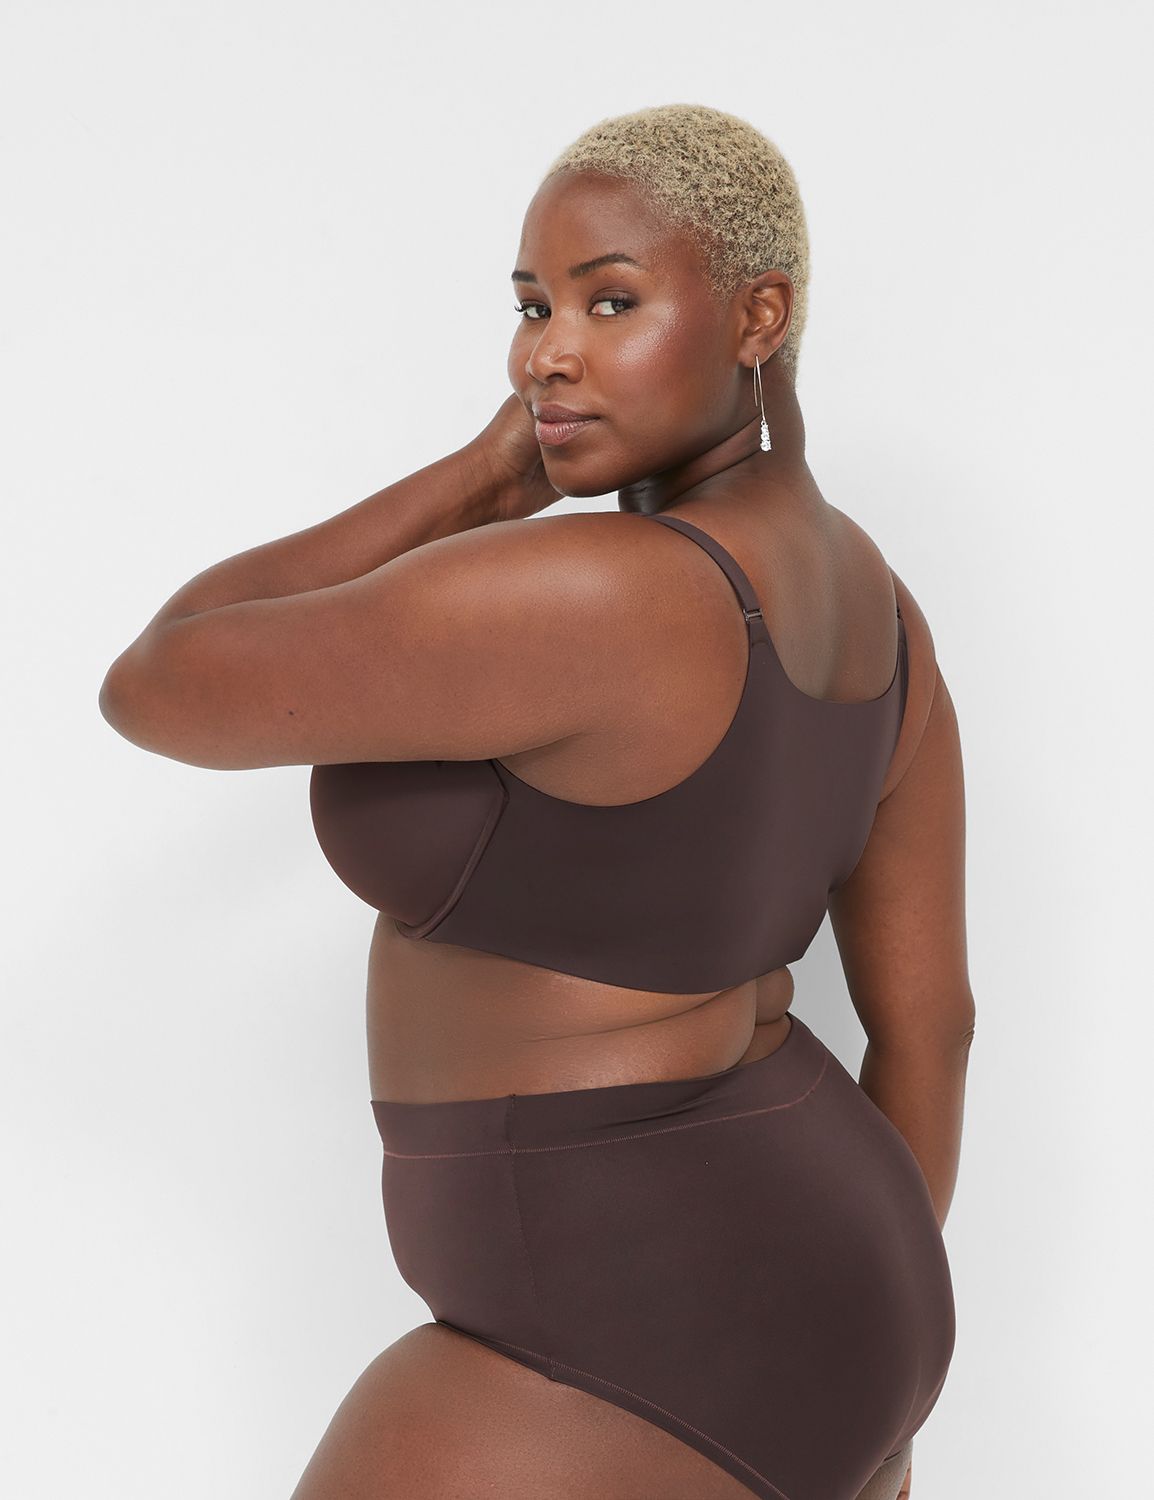 Lane Bryant - You know what holds us up? Reviews like this one on our NEW!  Cotton Front-Close bra. Don't forgetyou get $15 off any bra during our  Perfect Bra Fit Event!